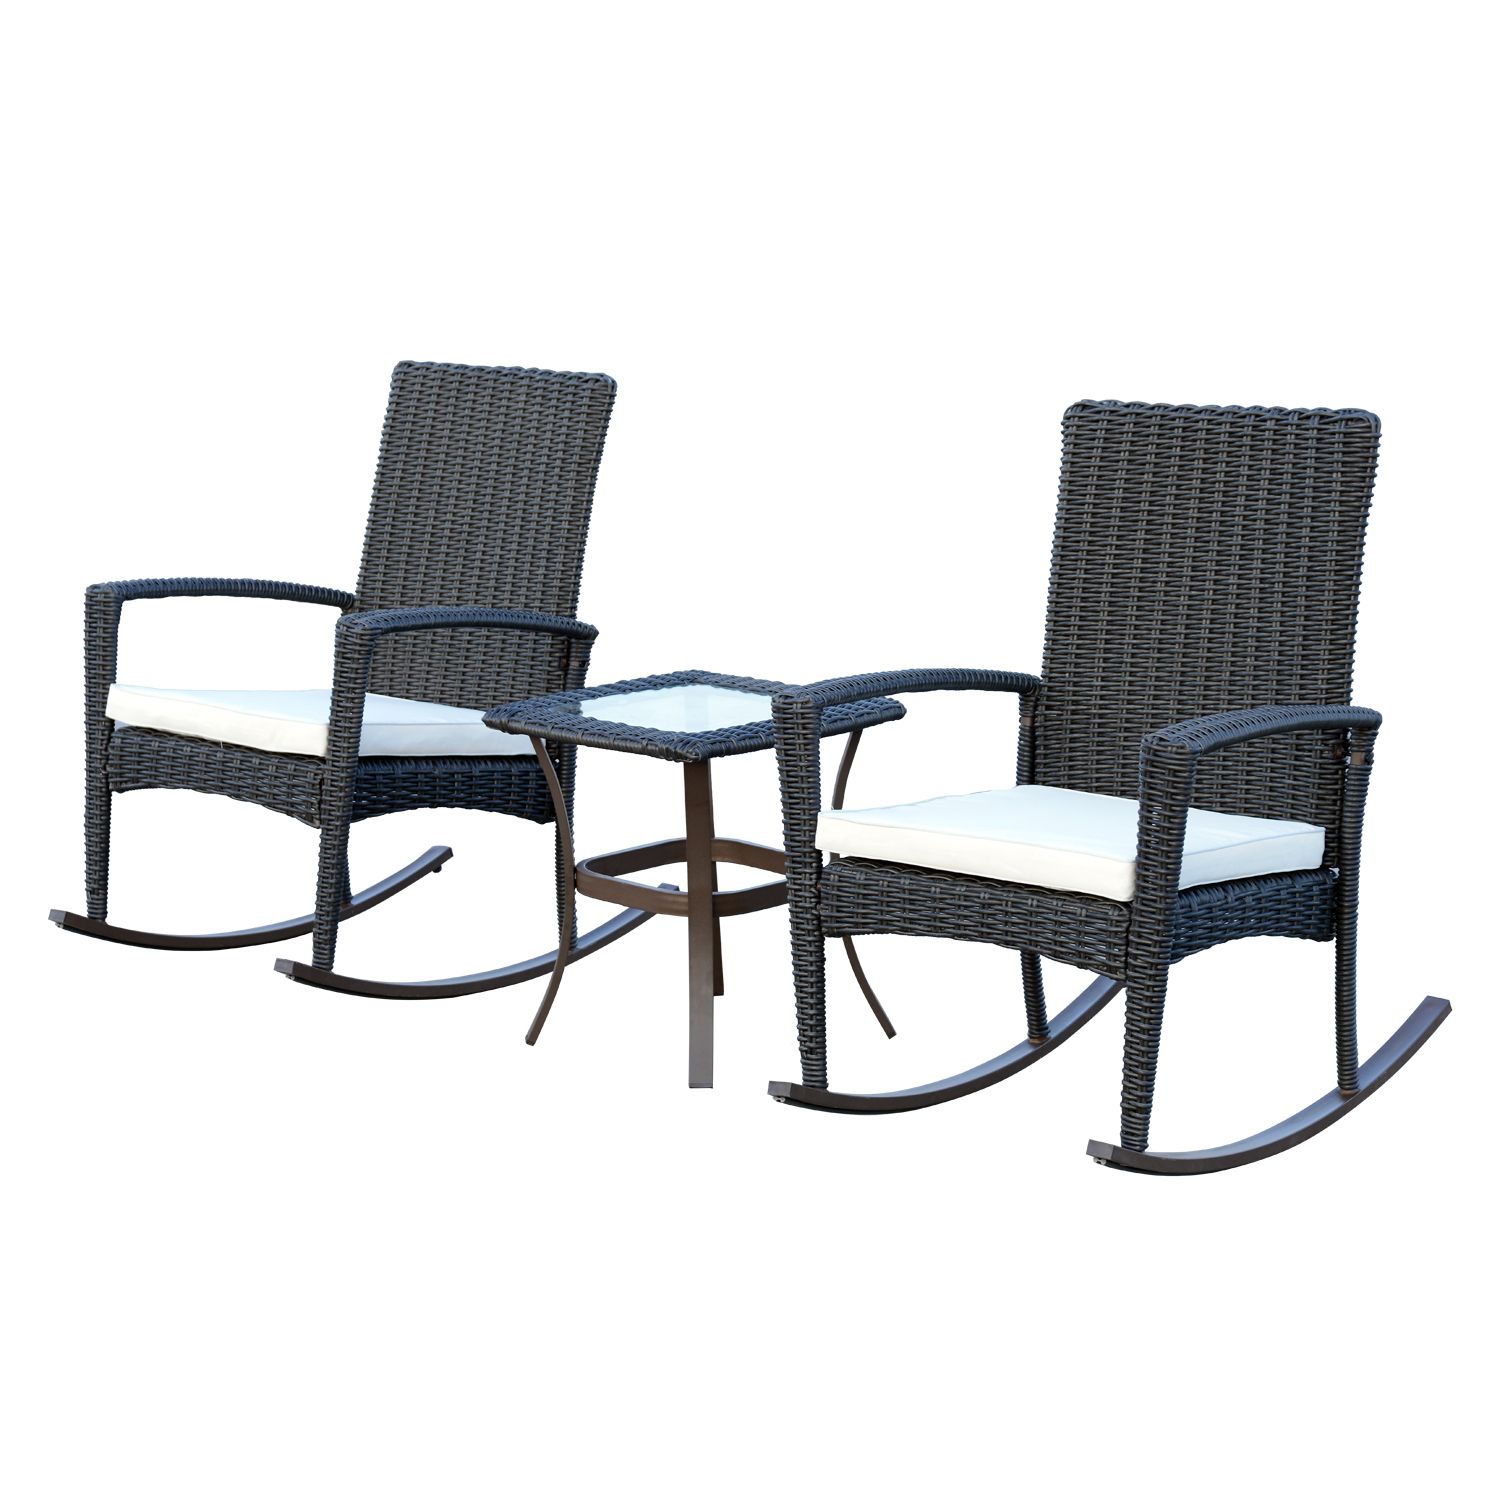 Outsunny 3Pcs Rattan Rocking Chair Table Set Patio Bistro Set Dark Grey Inside Outdoor Rocking Chair Sets With Coffee Table (View 2 of 15)